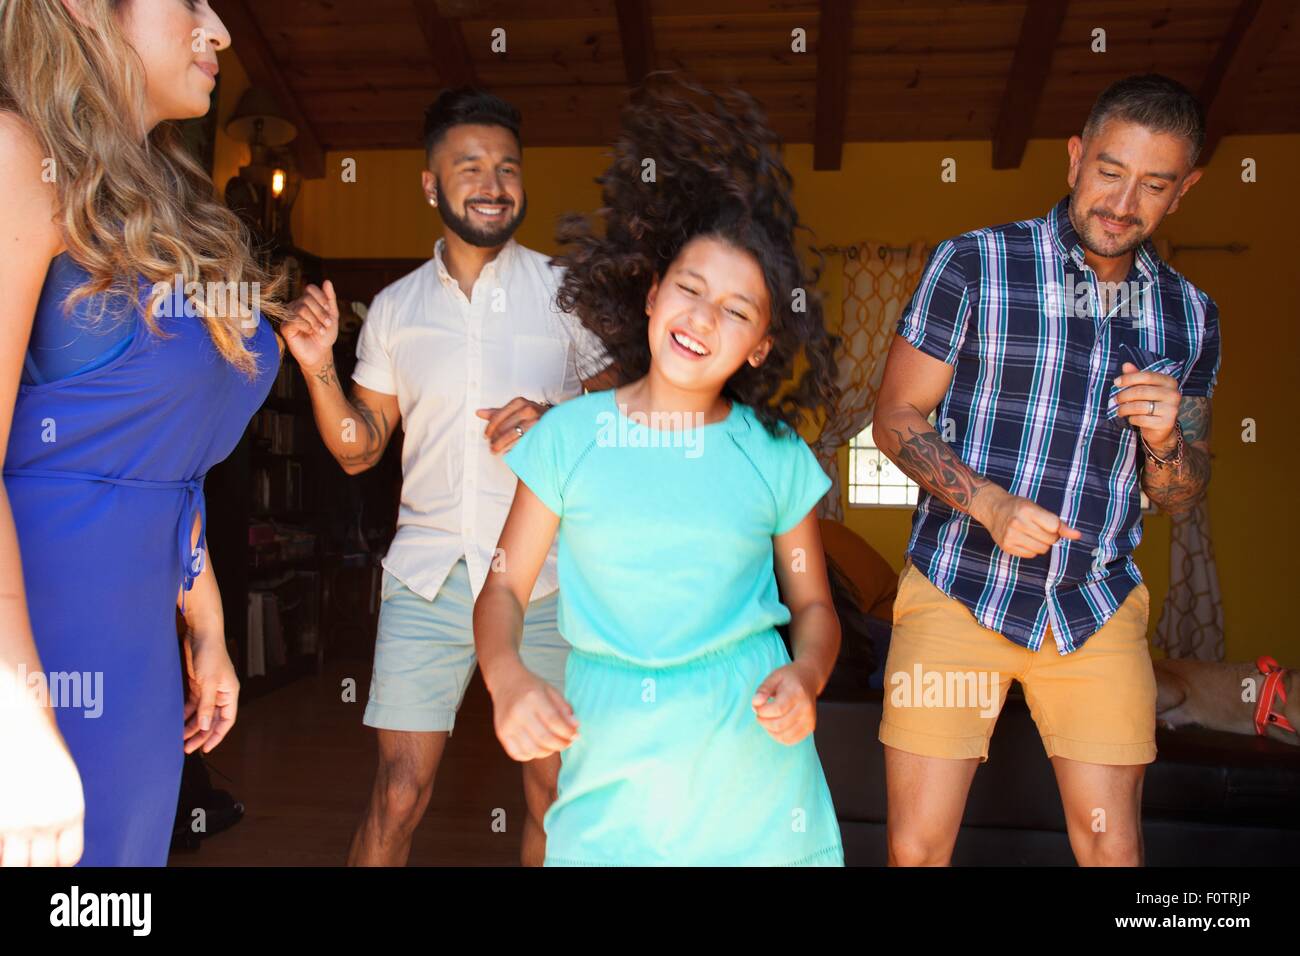 Girl and family dancing in living room Stock Photo